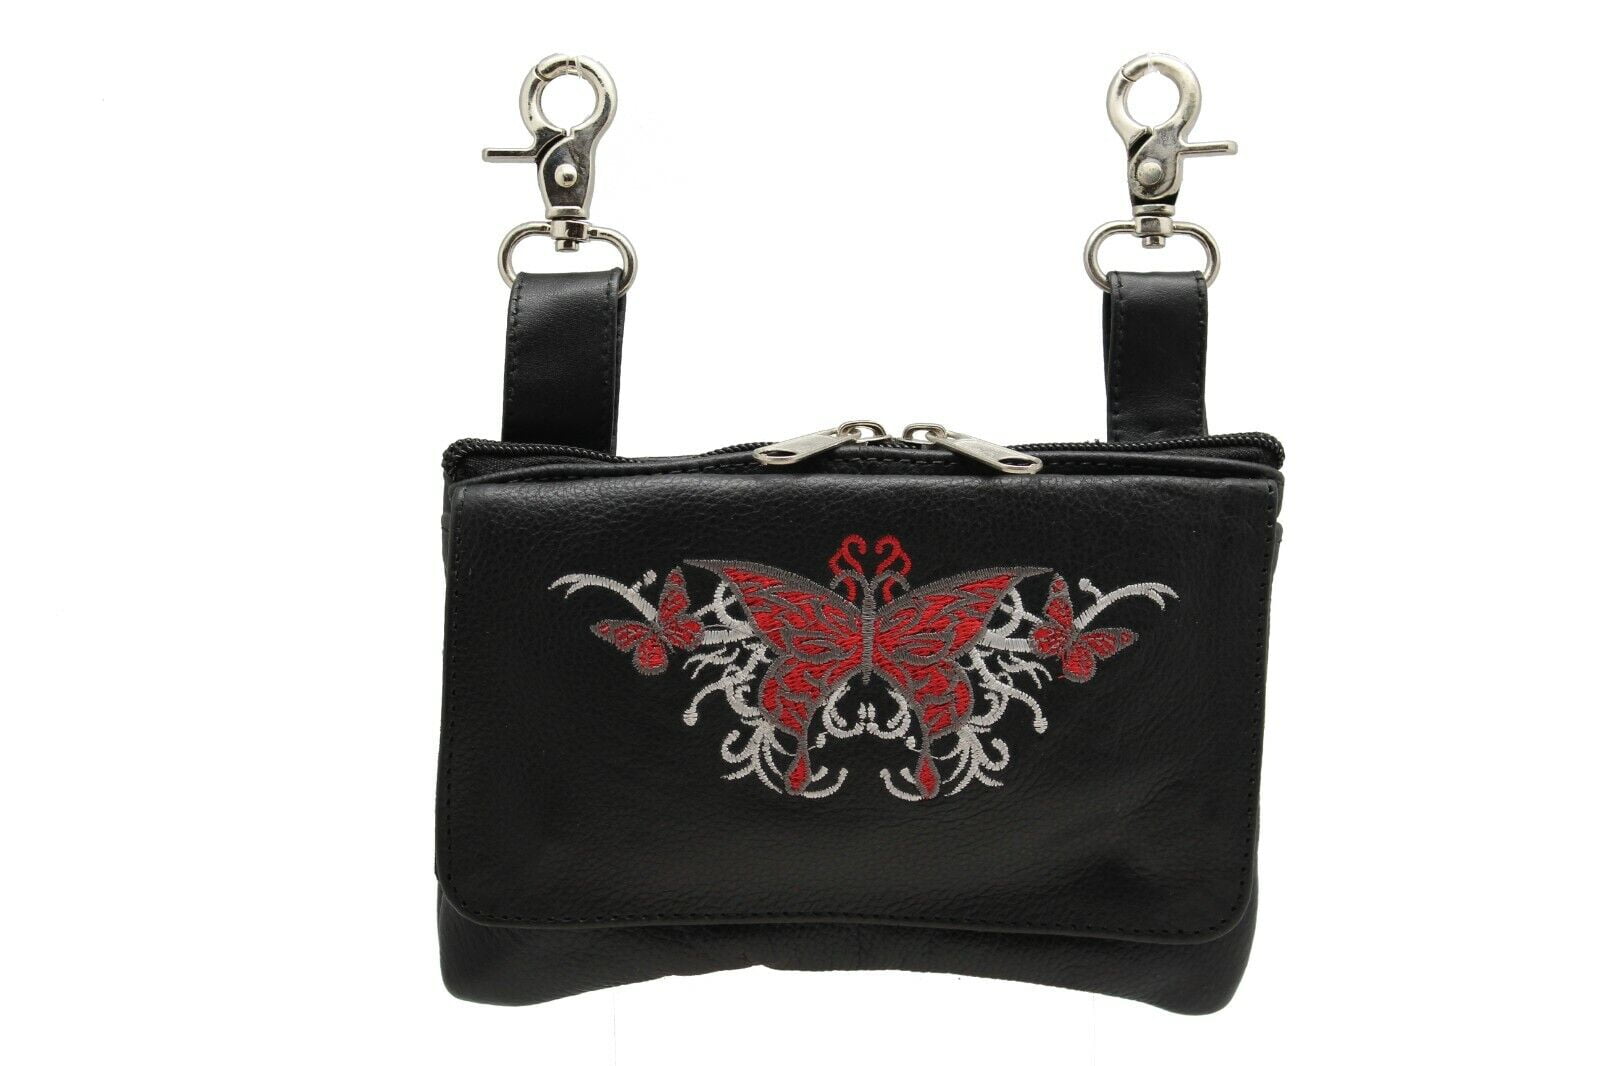 Shop Leather Belt Bag Hip Purse Embroidered Eagle TURQOUSE Silver ROSE  Online - SUNSET LEATHER